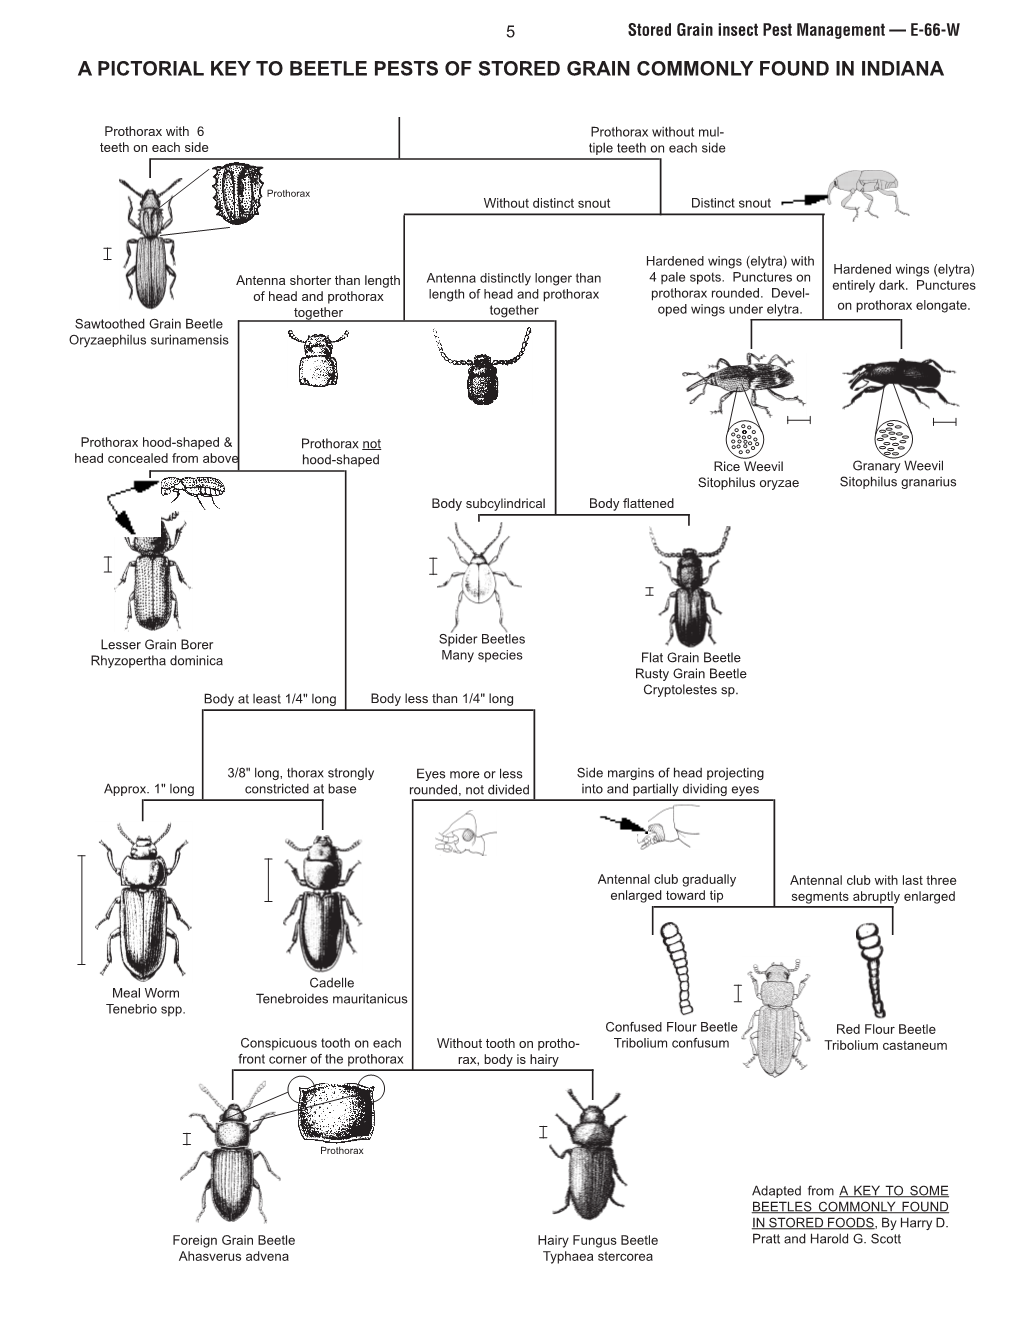 A Pictorial Key to Beetle Pests of Stored Grain Commonly Found in Indiana